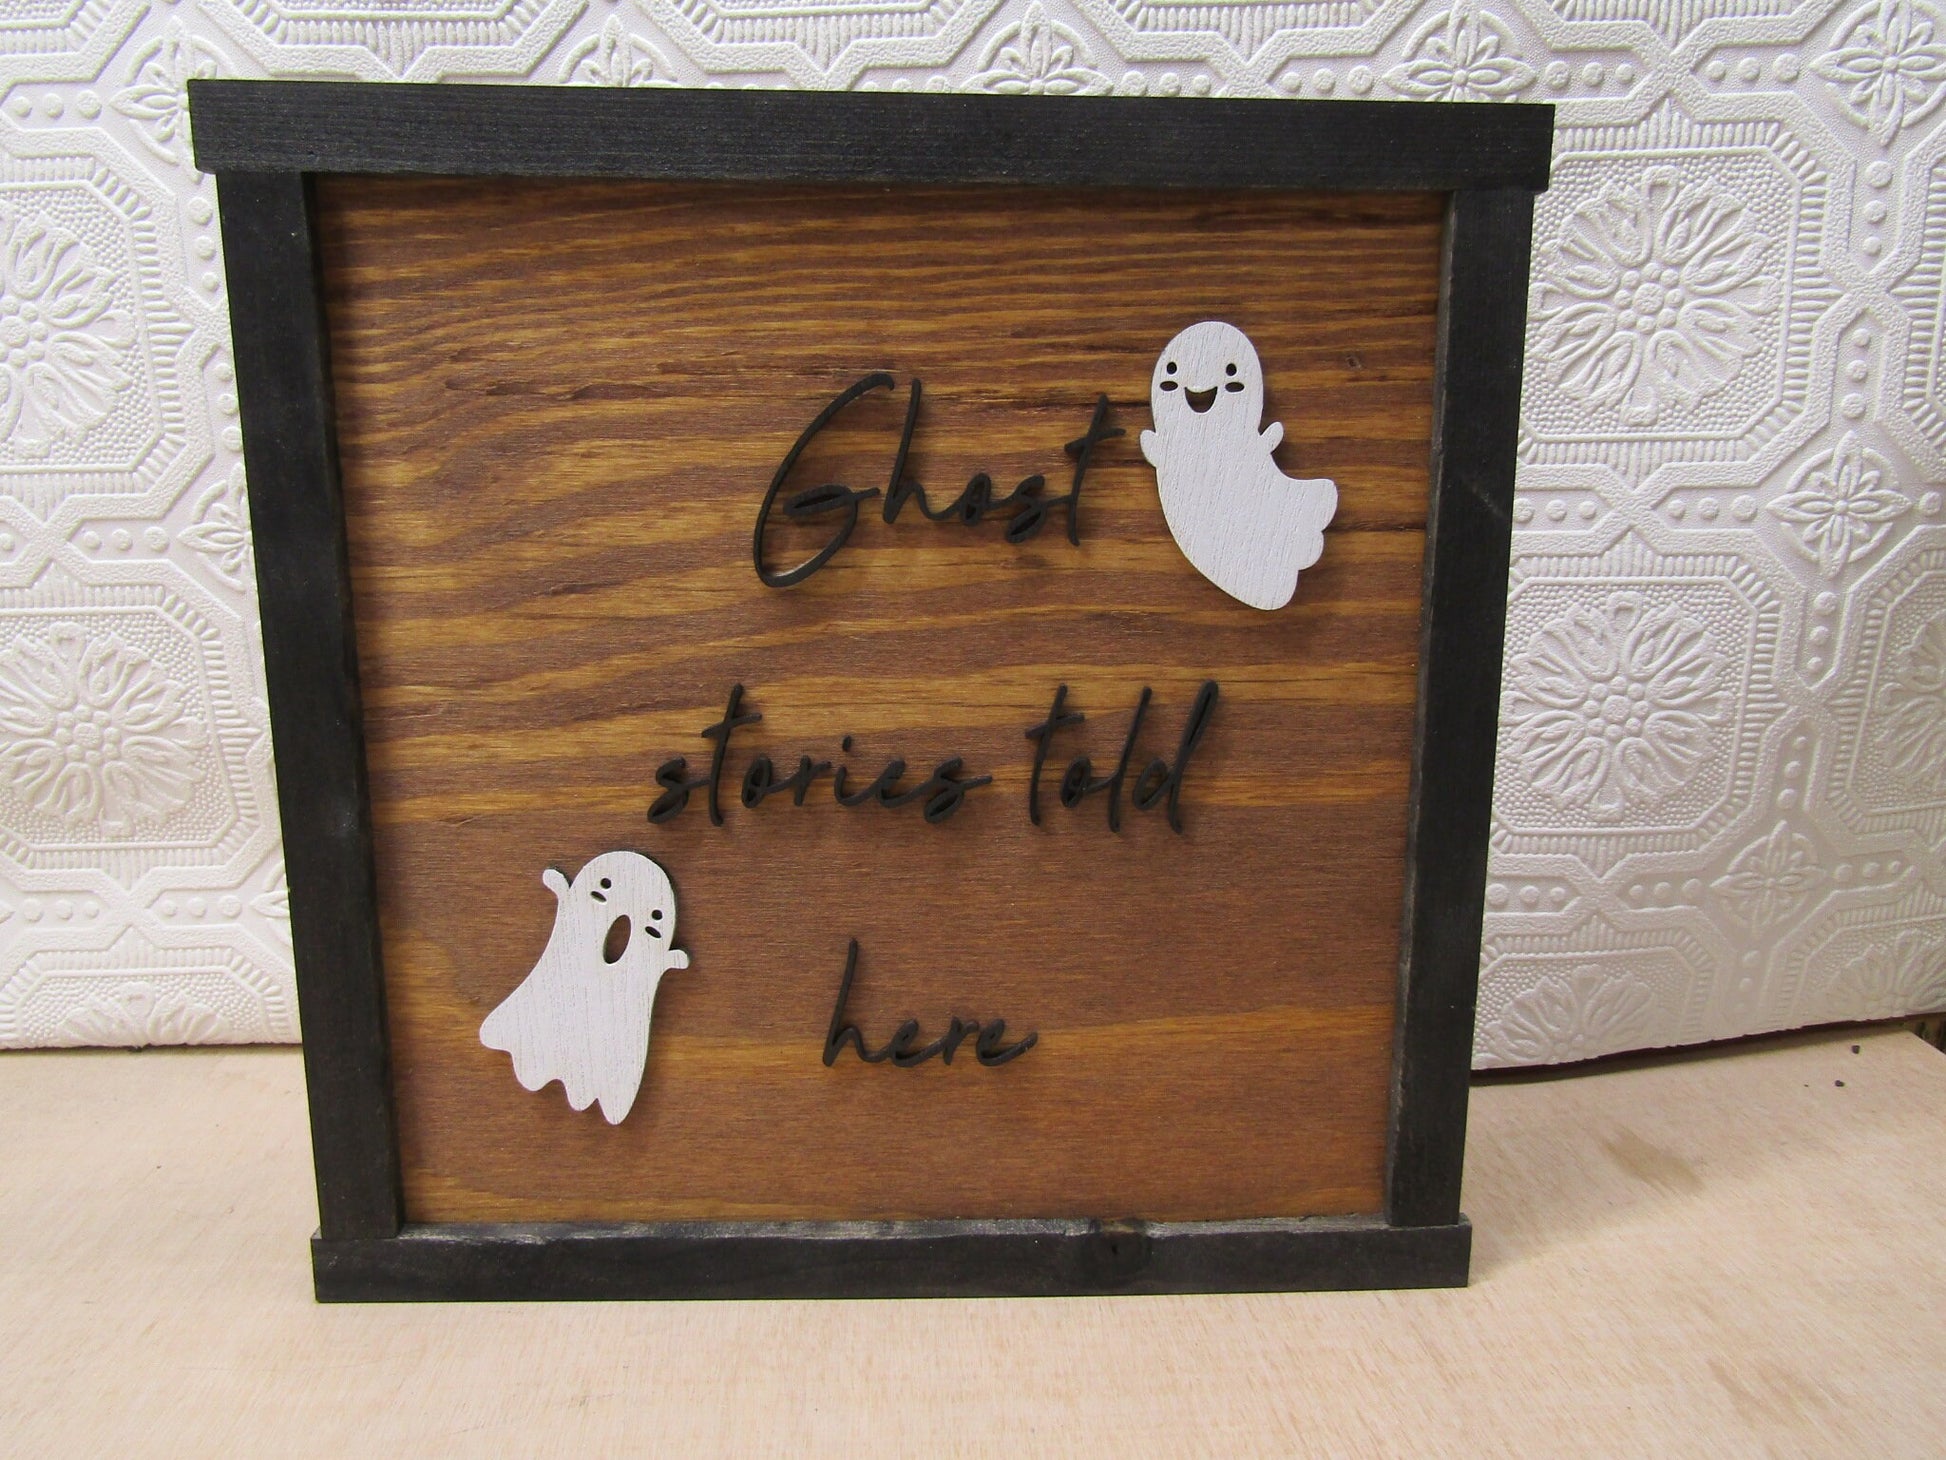 Wooden Halloween Sign Ghosts Ghost Stories Told Here Theme Cute Spooky Fall Decor Trick Or Treat 3D Raised Text Handmade Framed Signage